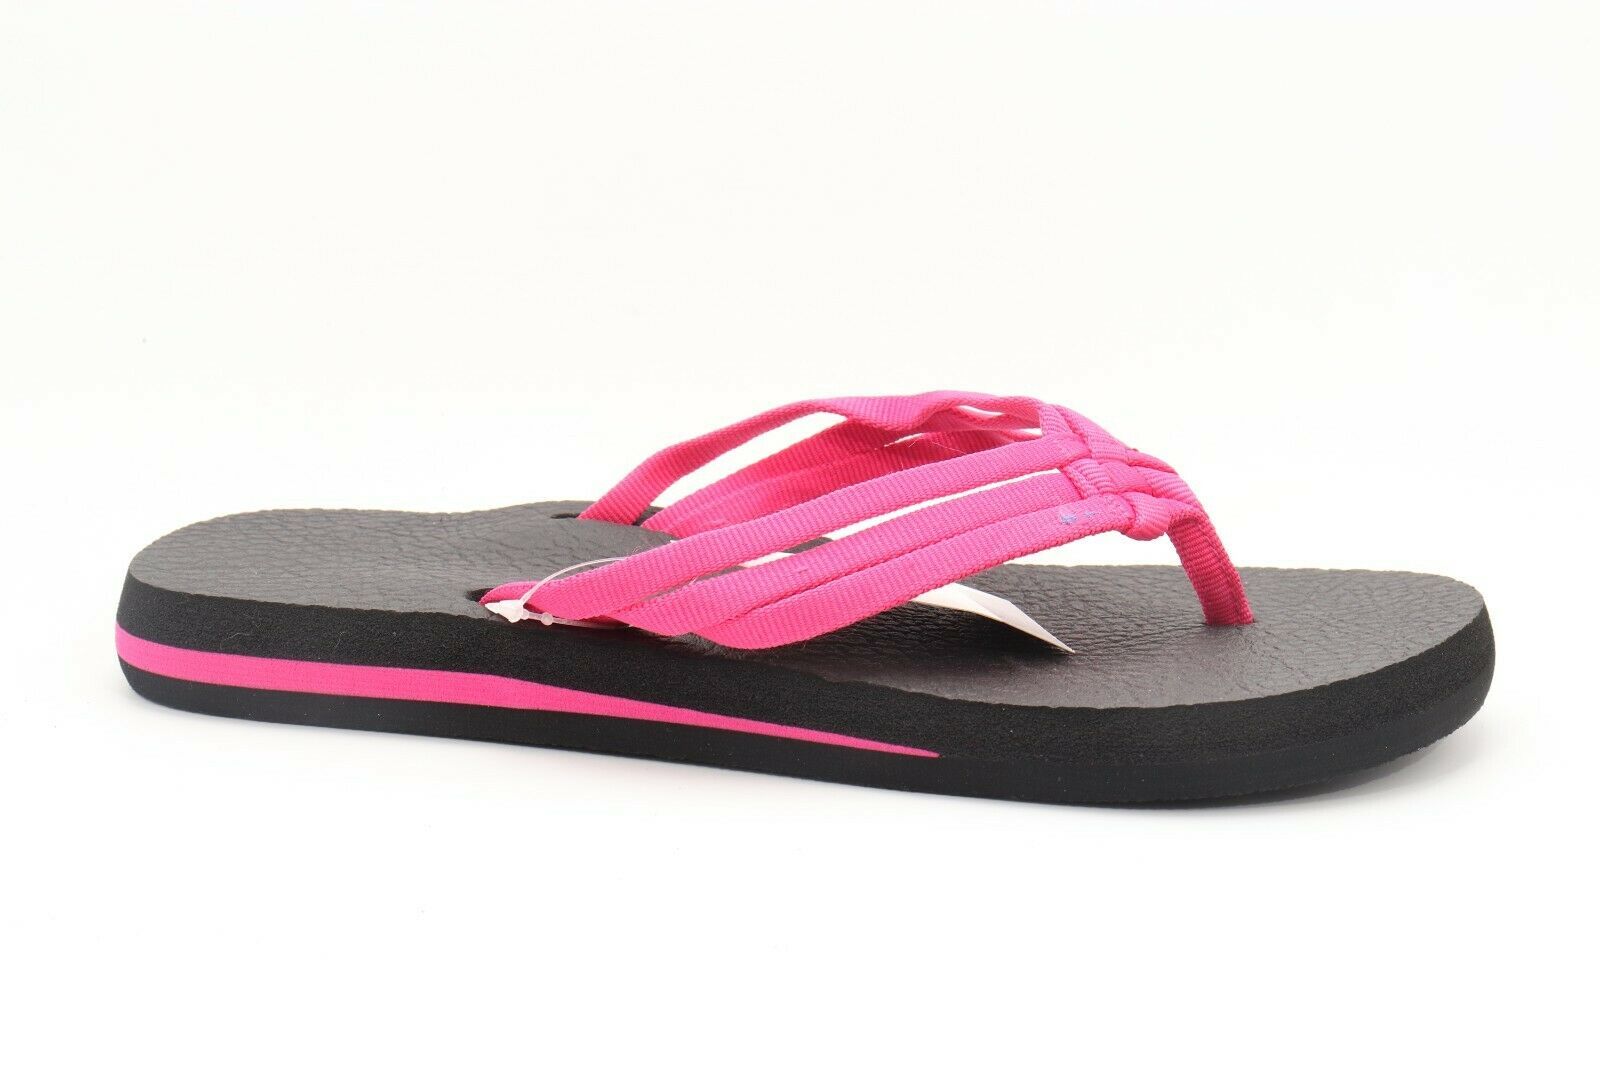 Primary image for Zealand  Iona Flip Flops Thong  Beach Sandals Coral Women's  Size  9 ( $) 